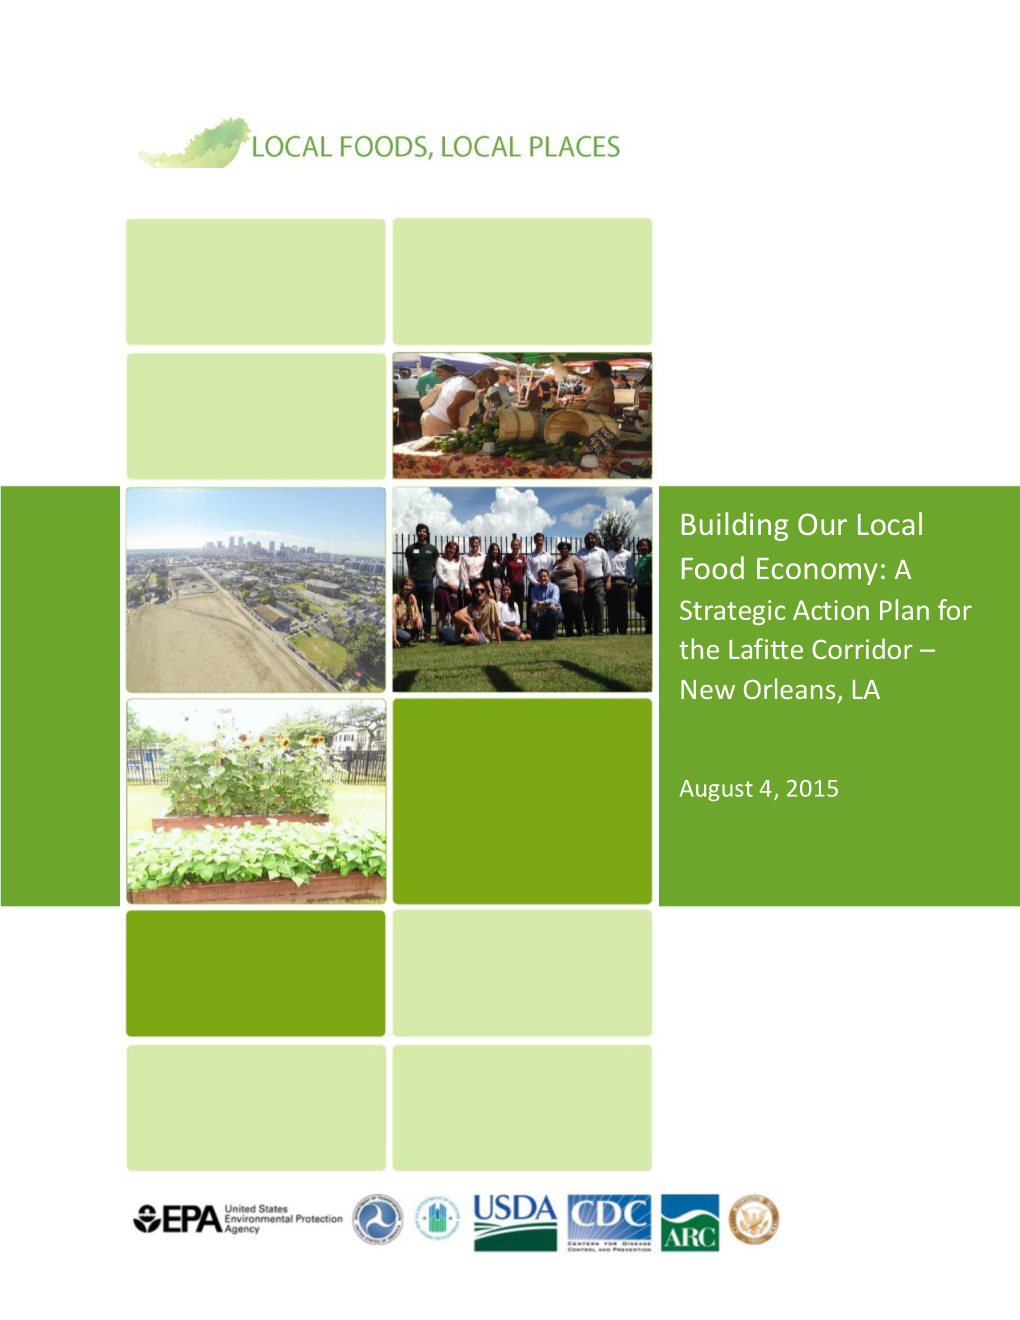 Local Foods, Local Places: Actions and Strategies for New Orleans, Louisiana